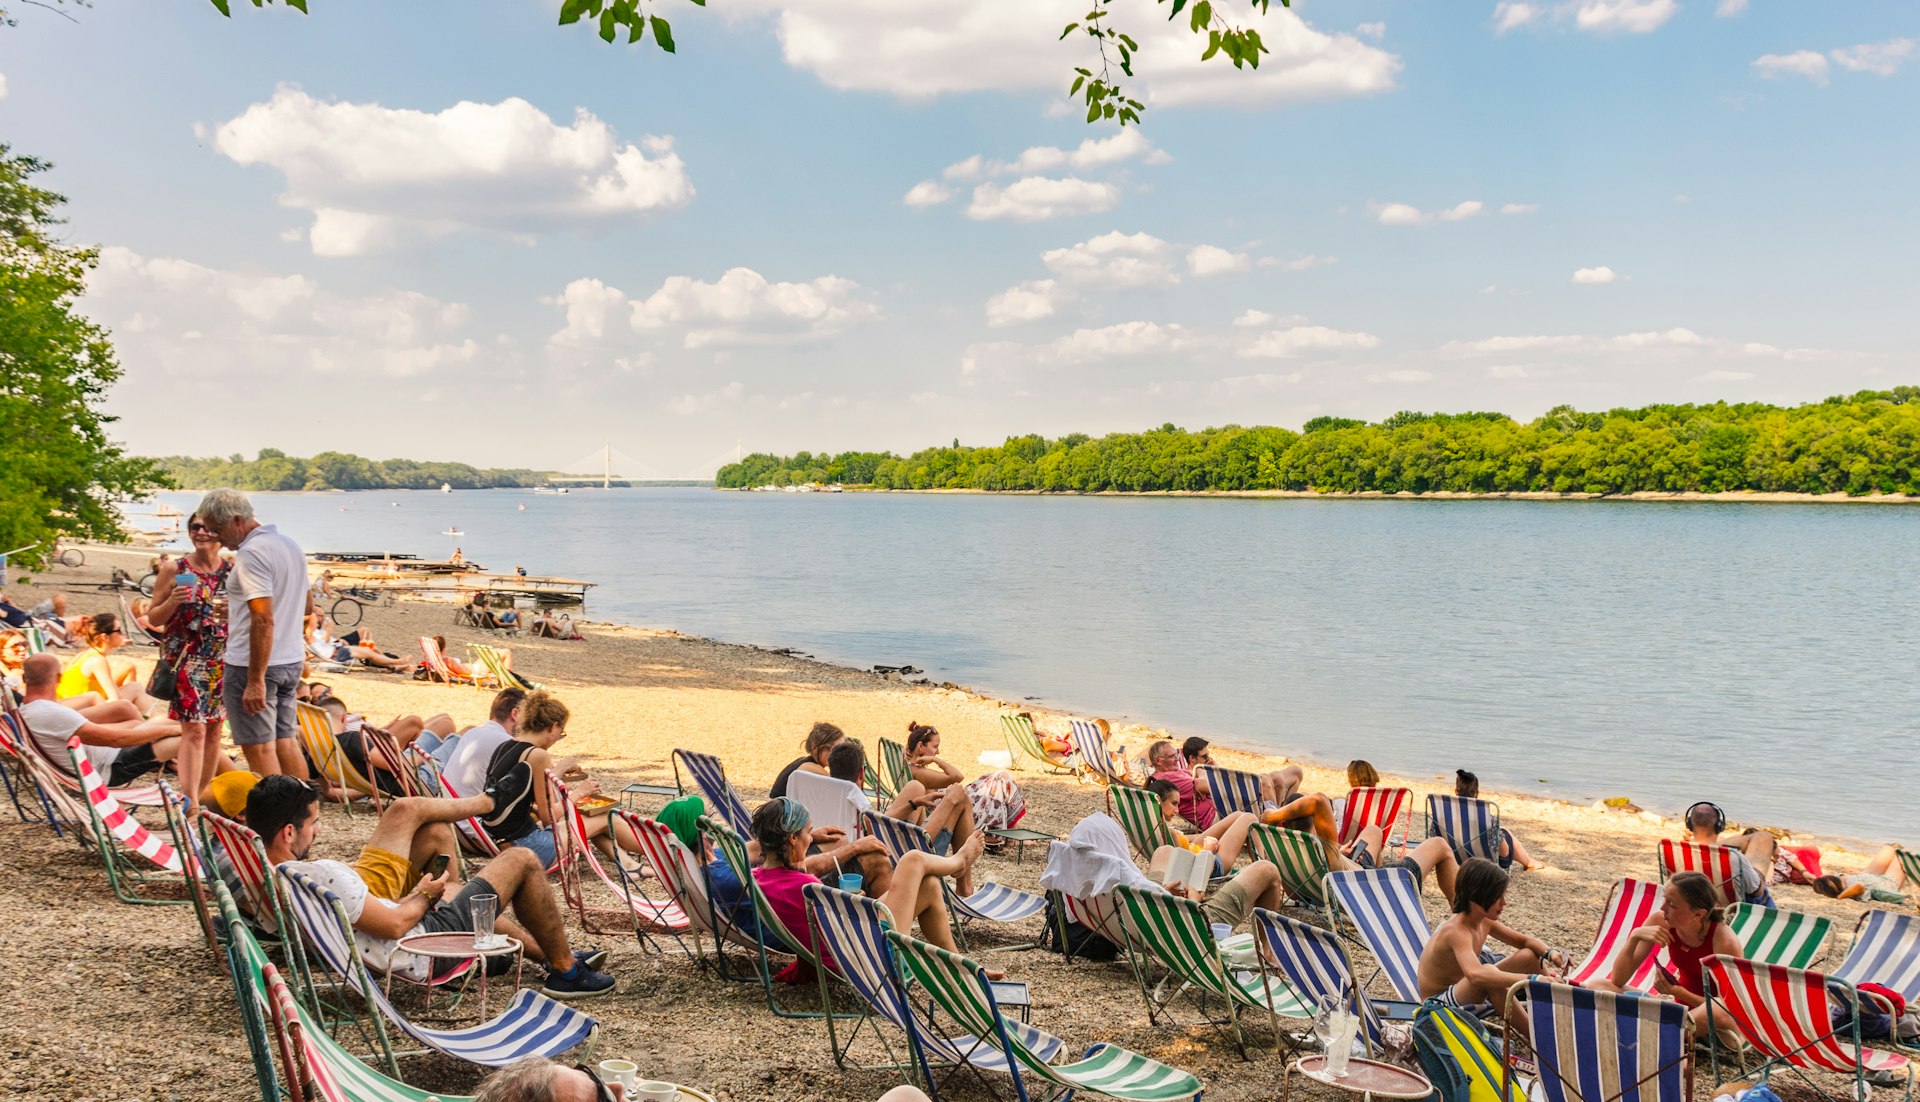 People relaxing in deck chairs on a beach by the Danube River, Budapest